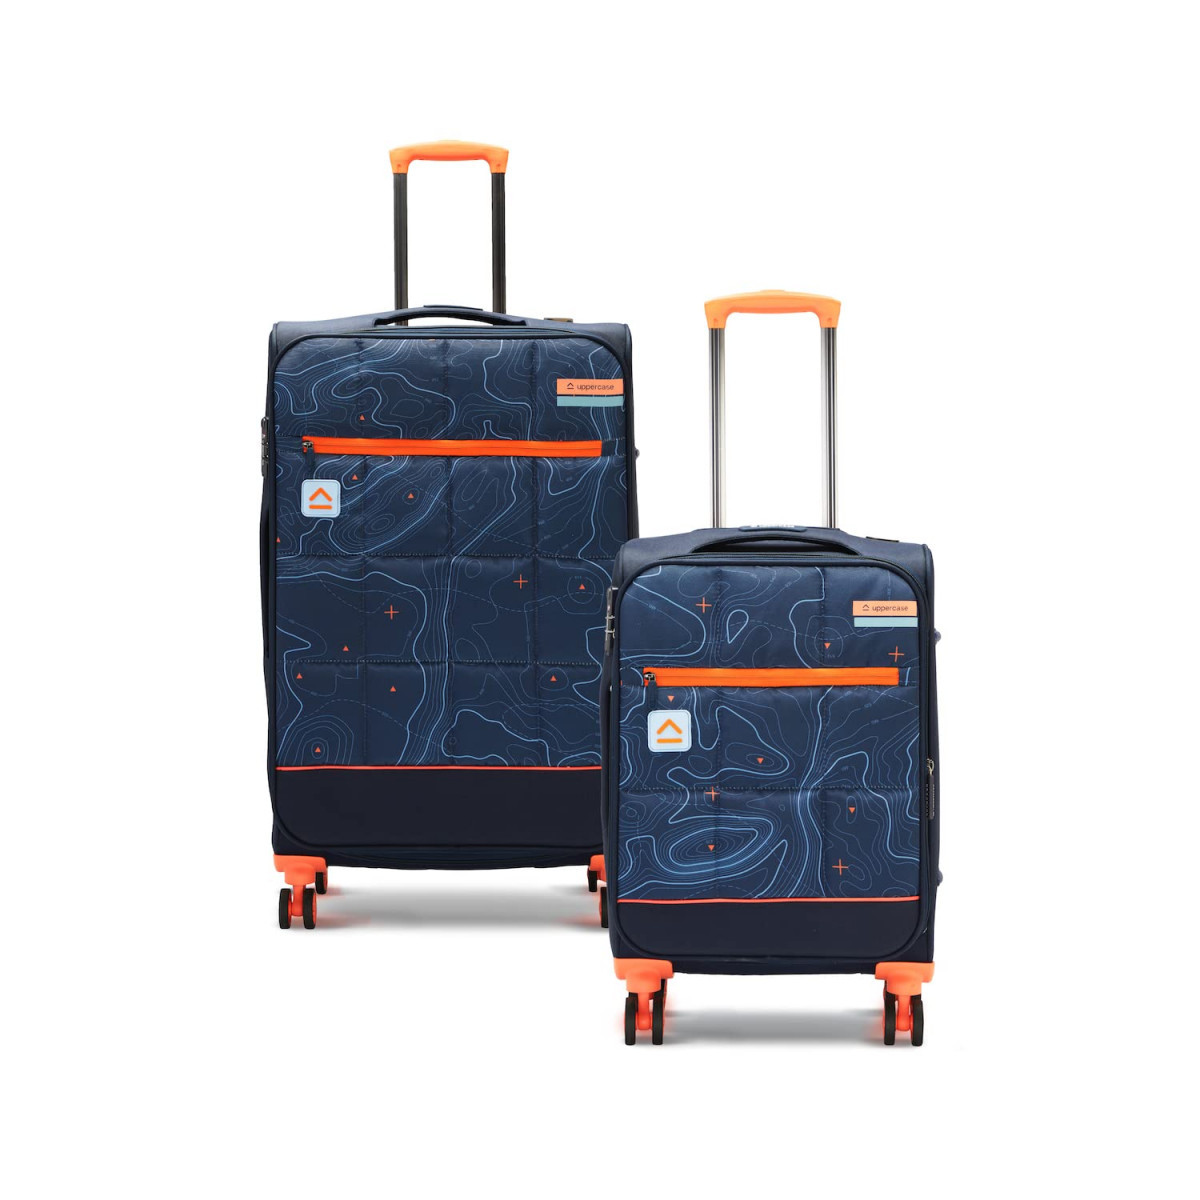 uppercase Topo Trolley Bag Set Of 2 SL Sustainable Cabin  Check-In Luggage Soft Printed Luggage Combination Lock 8 Wheel Suitcase For Men  Women 2500 Days Warranty Blue Polyester Spinner